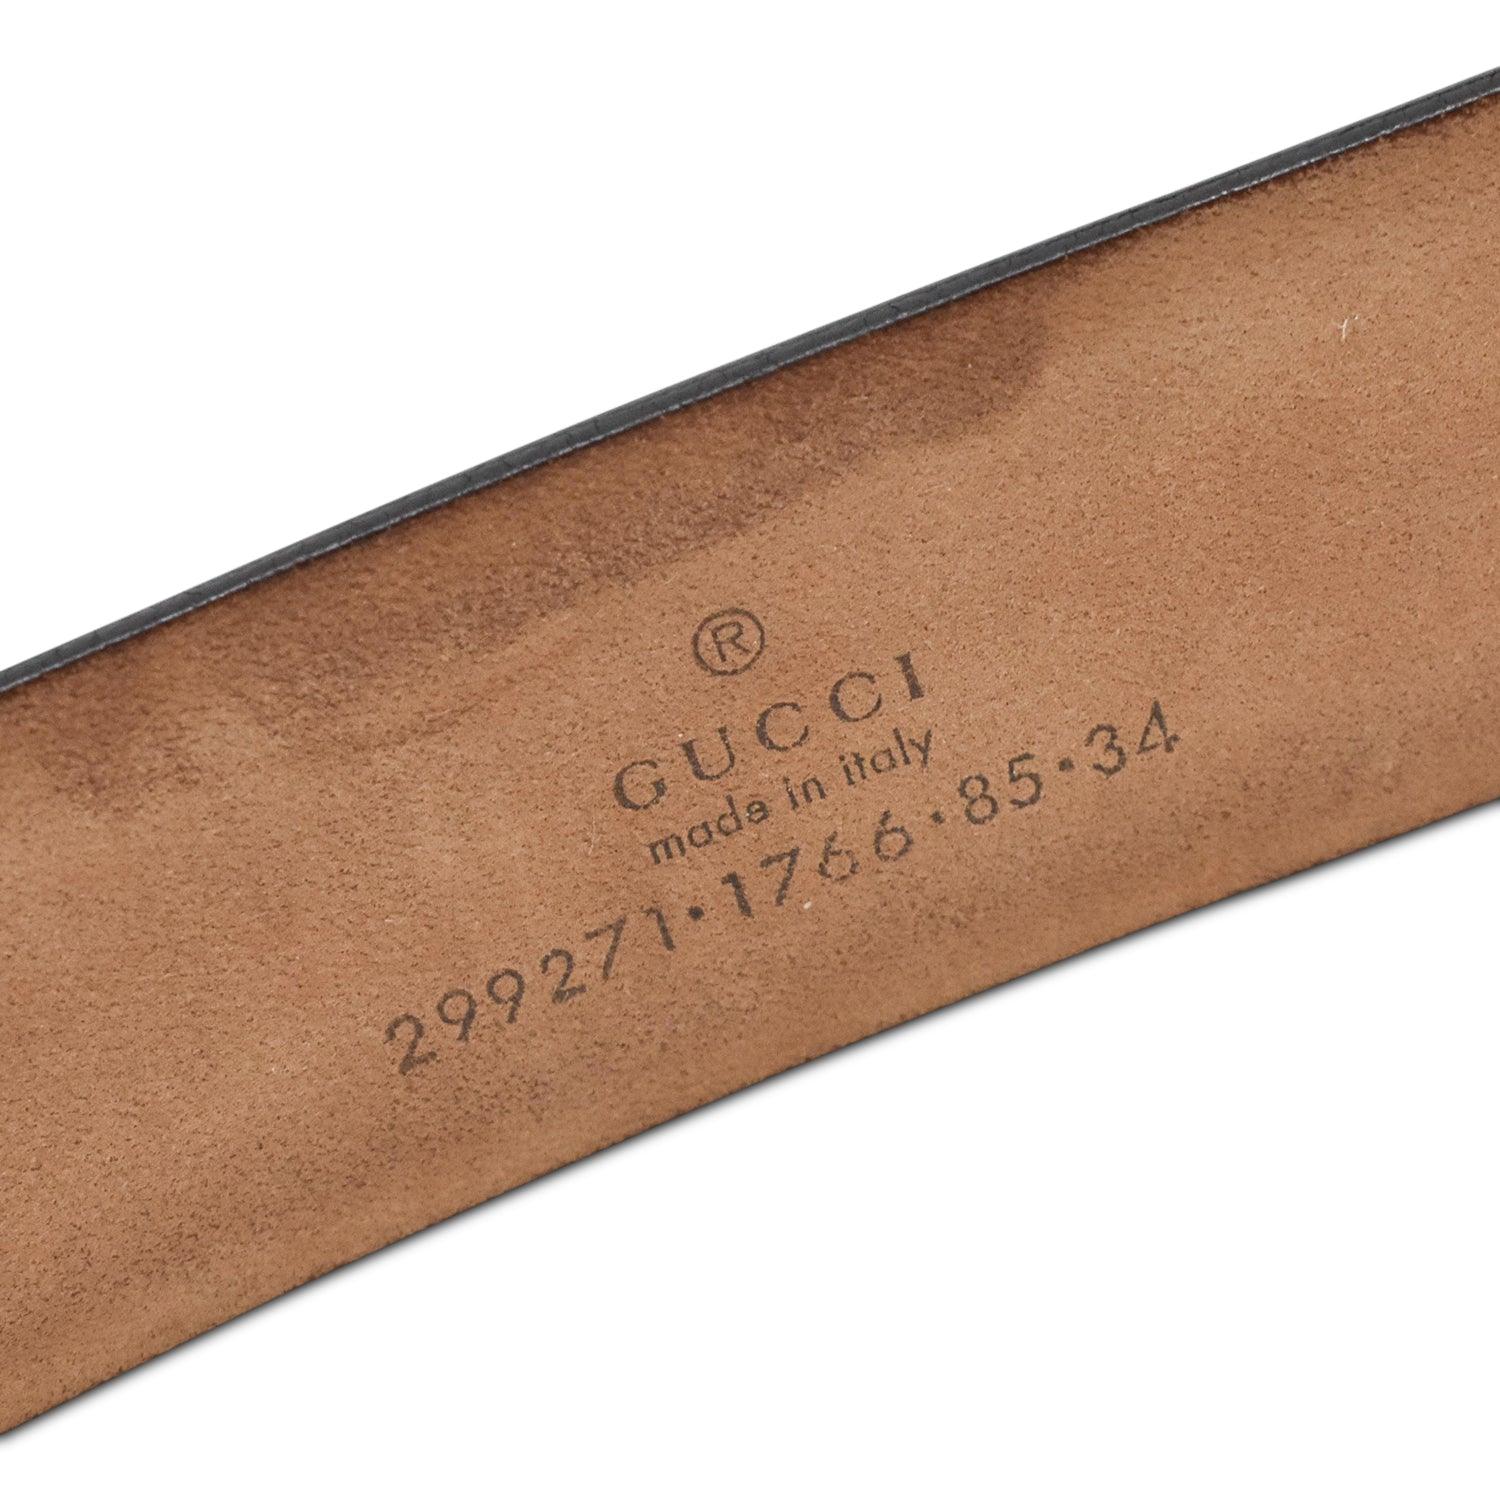 Gucci Belt - Women's 34/75 - Fashionably Yours